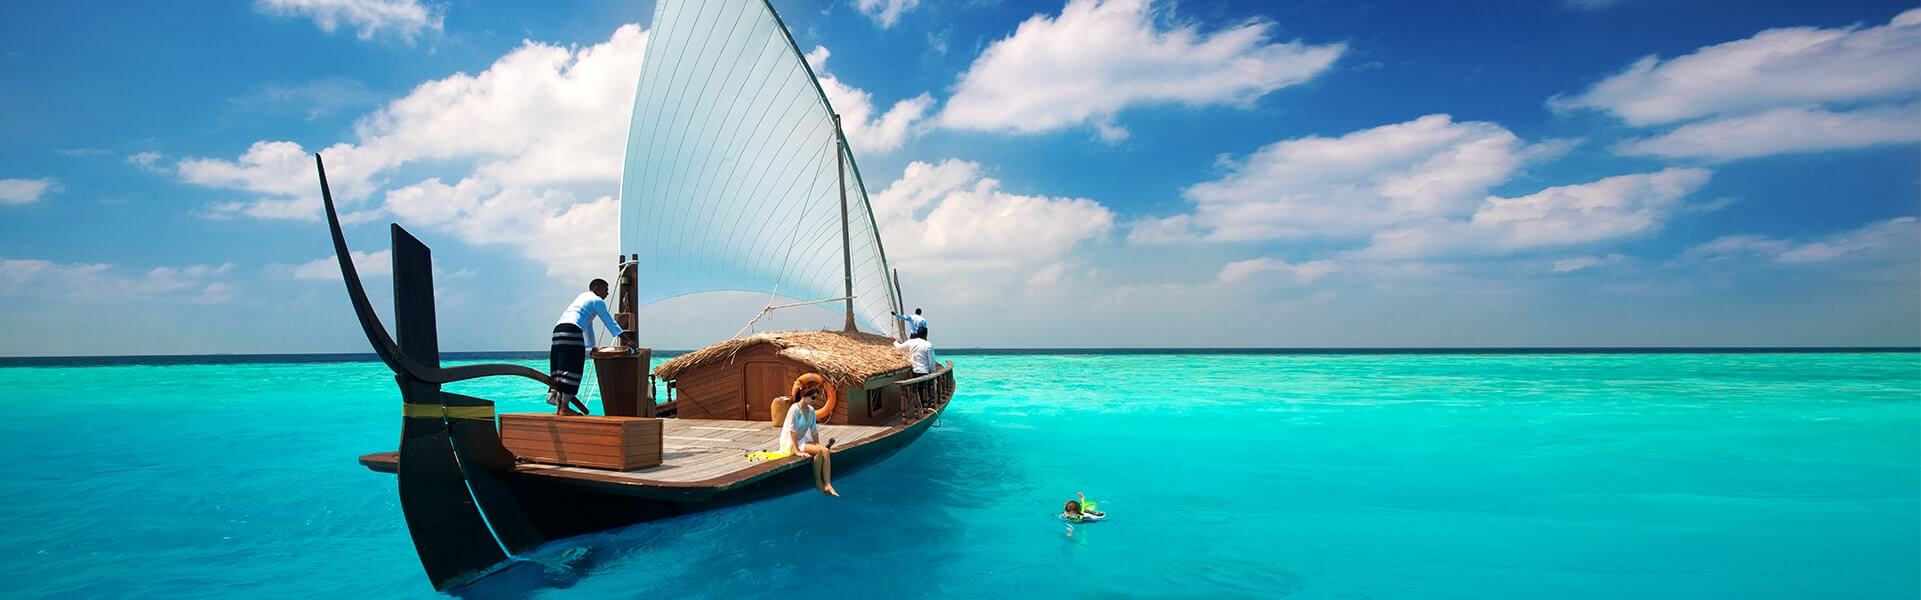 Maldives holiday packages 0